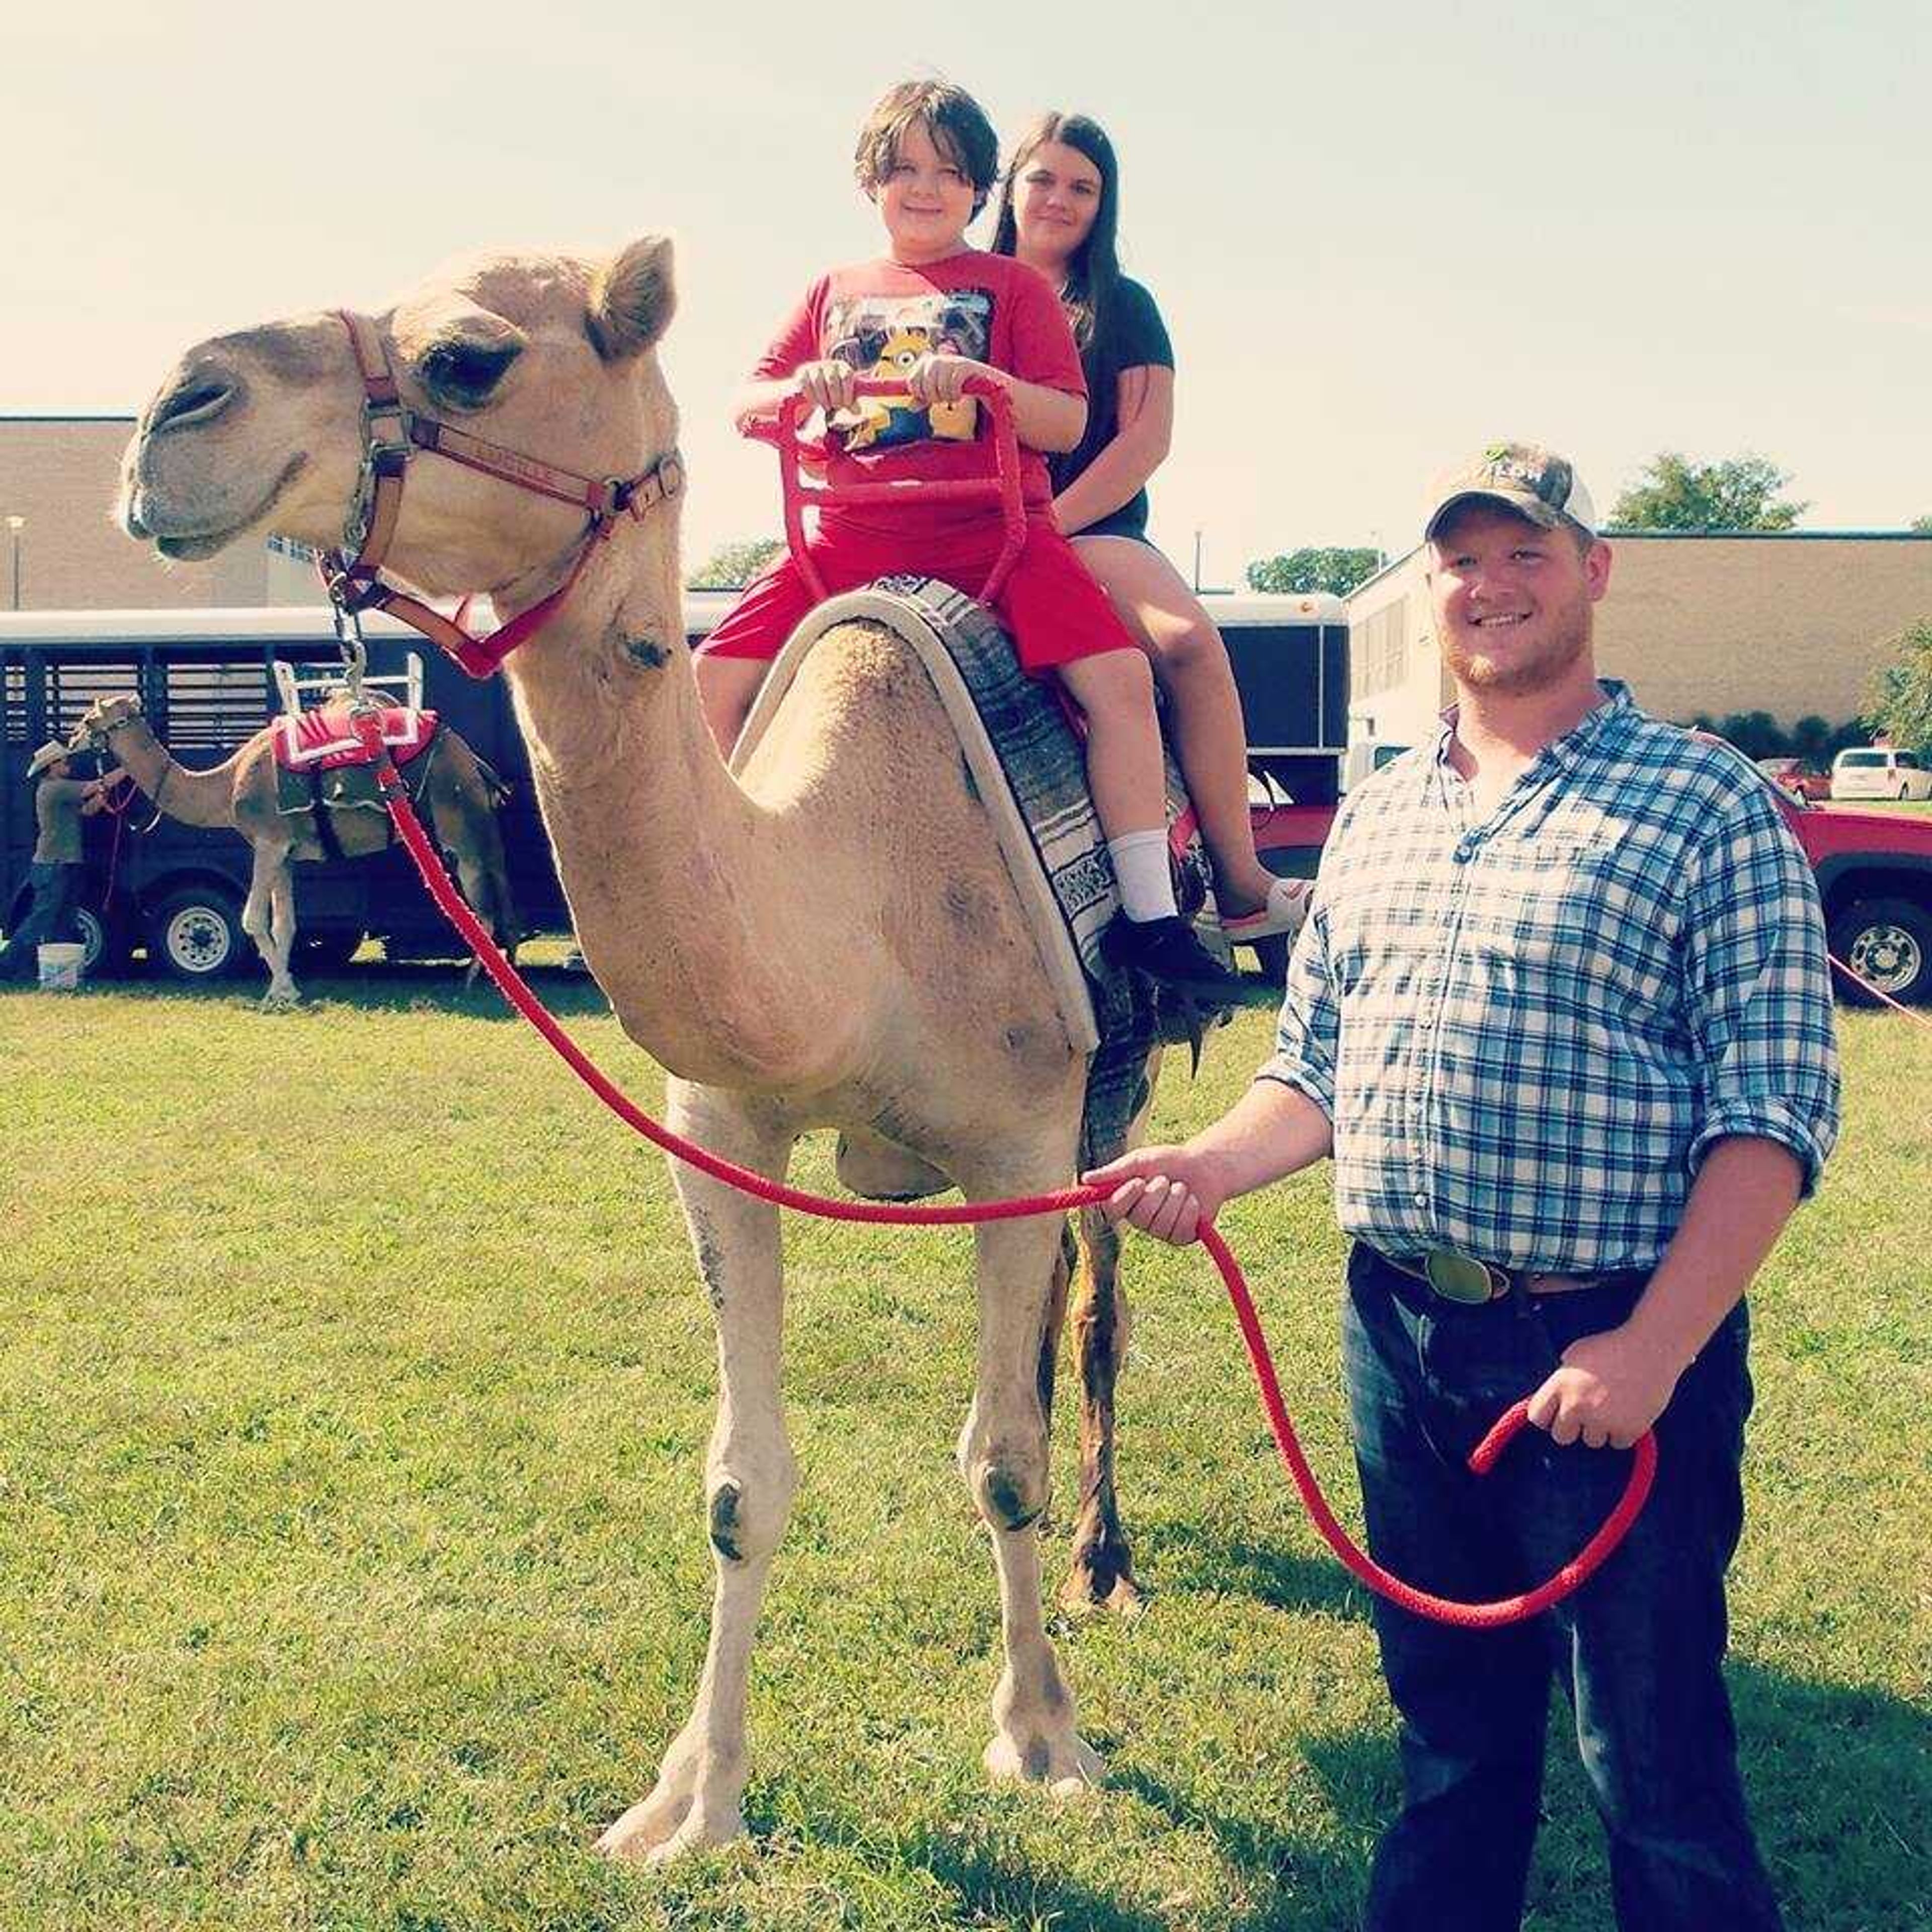 Camel rides were offered at the Project Lucille event hosted by the Department of Agriculture.